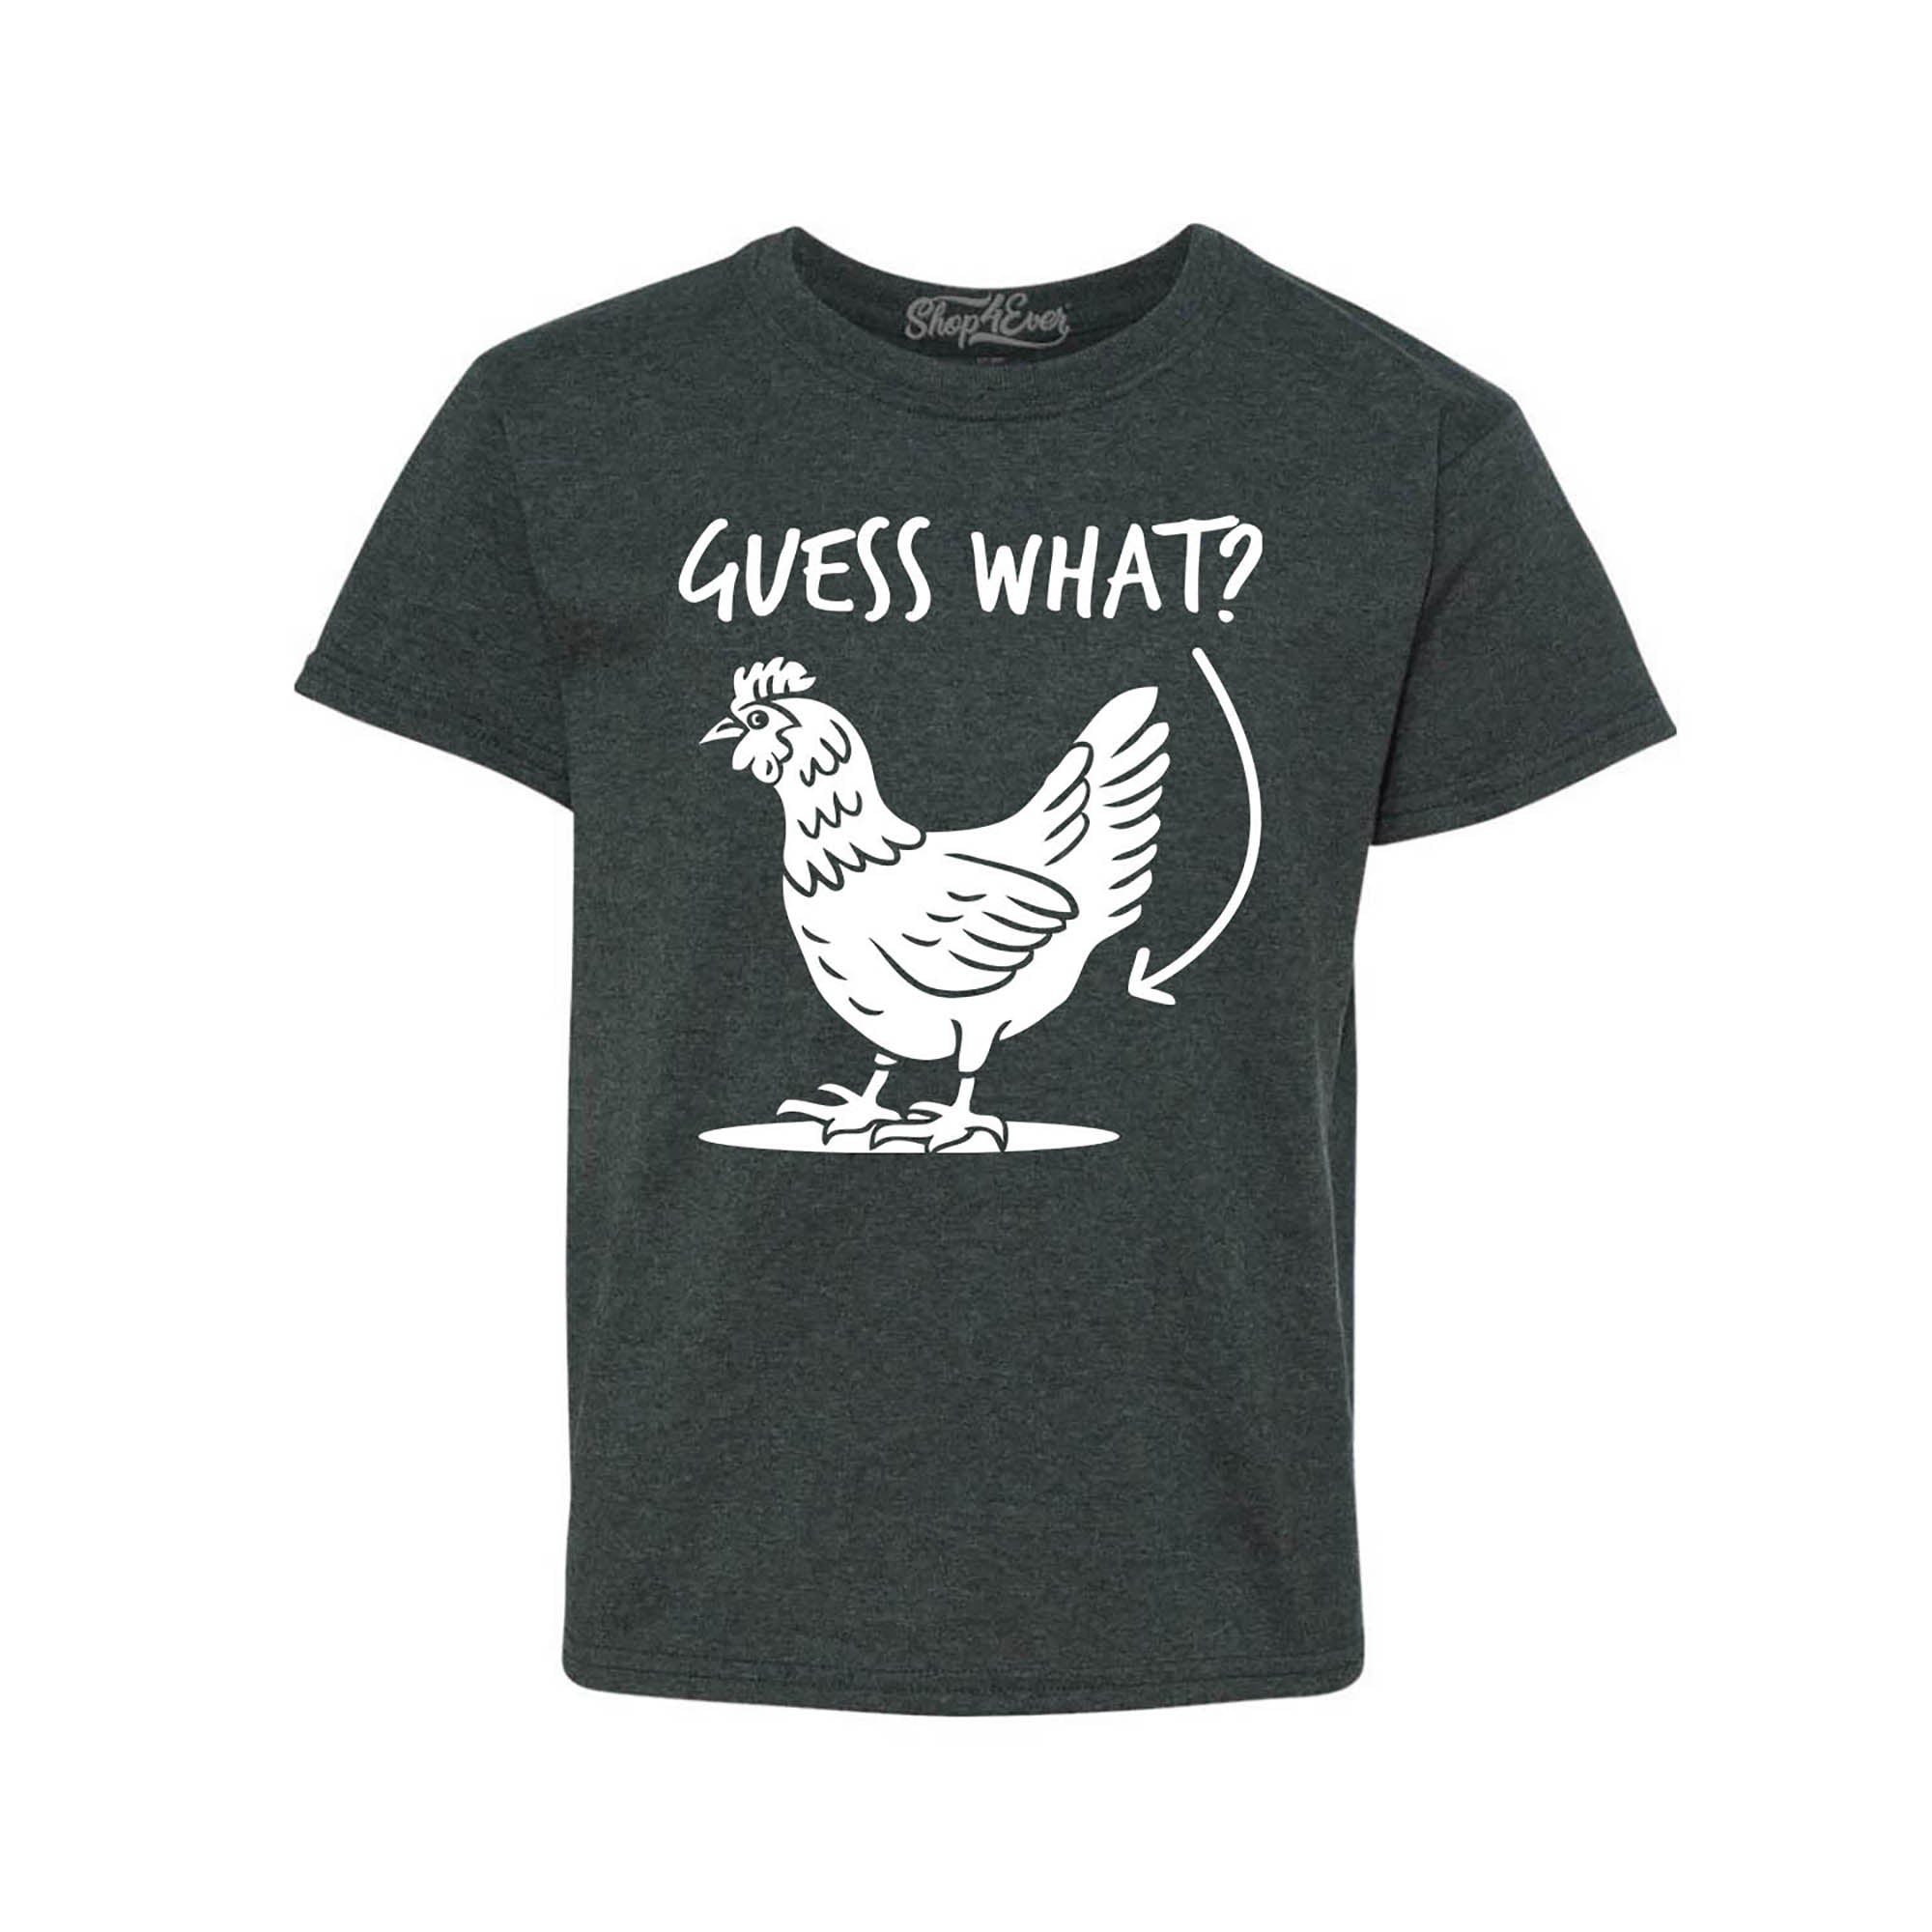 Guess What? Chicken Butt Kids Child Funny Youth's T-Shirt